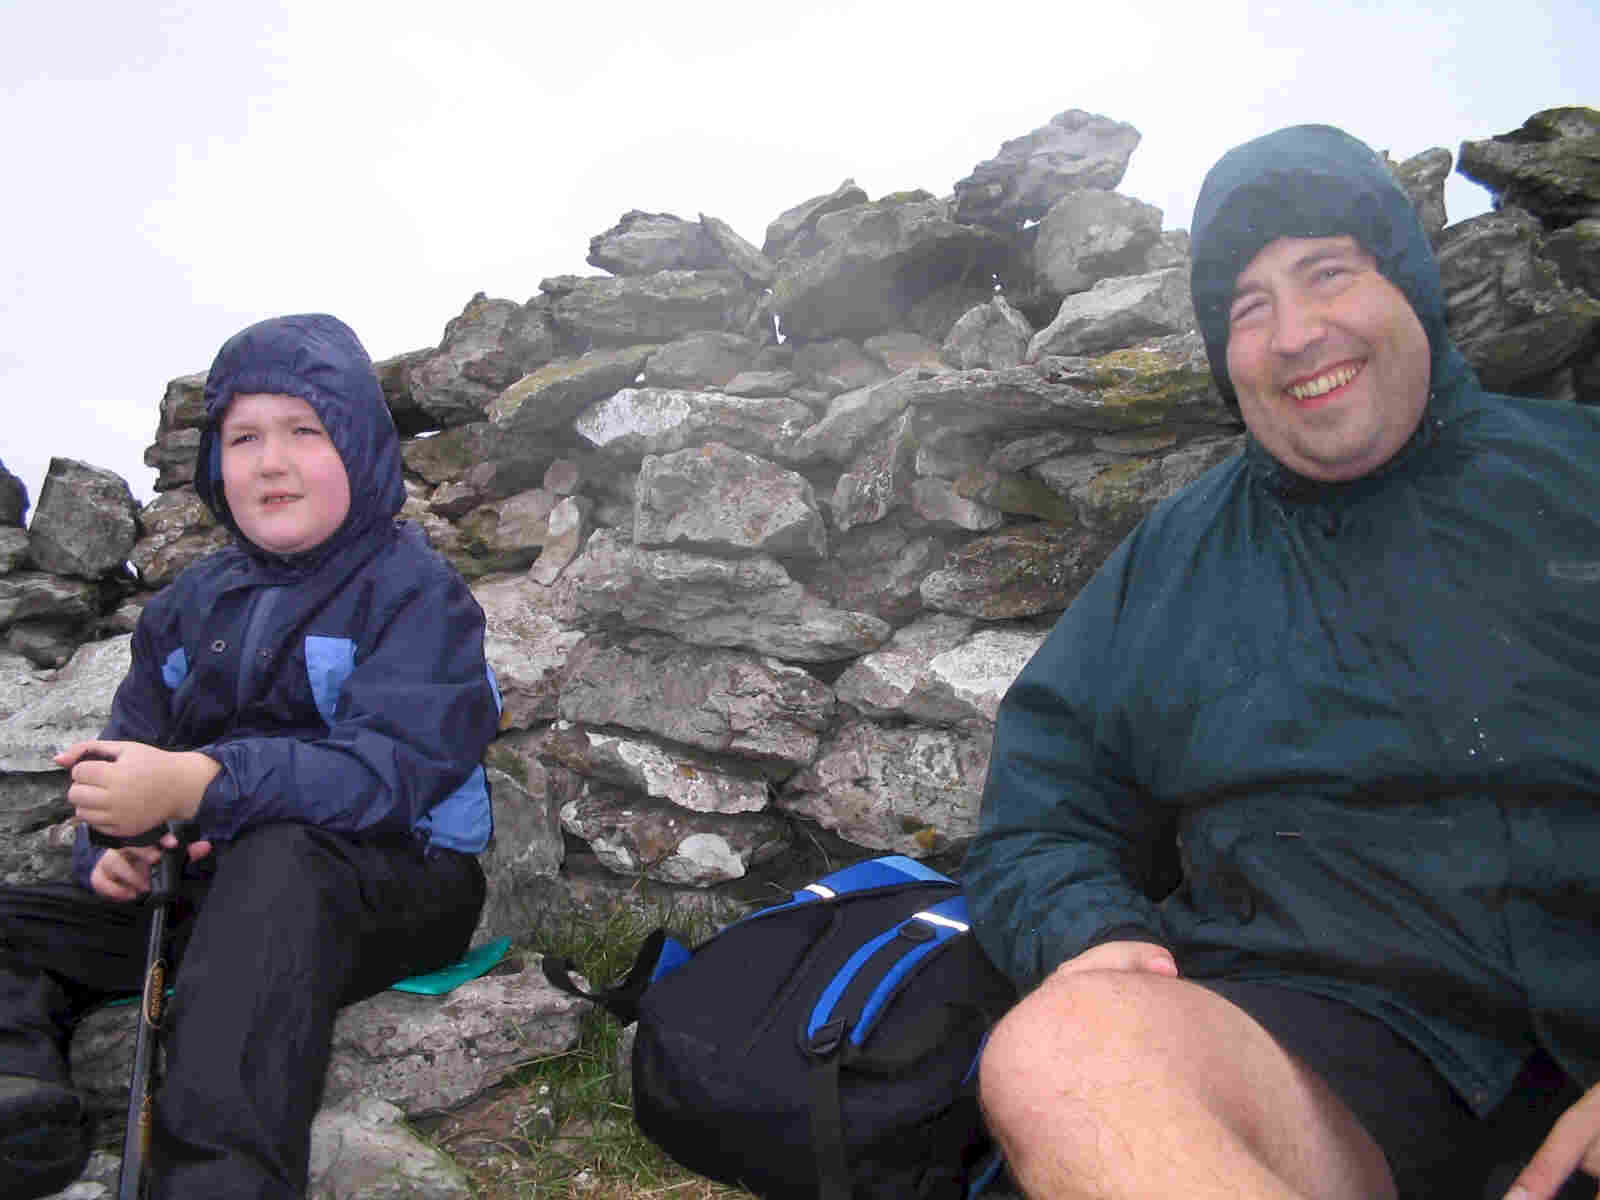 Liam & Tom in the shelter on Whitbarrow